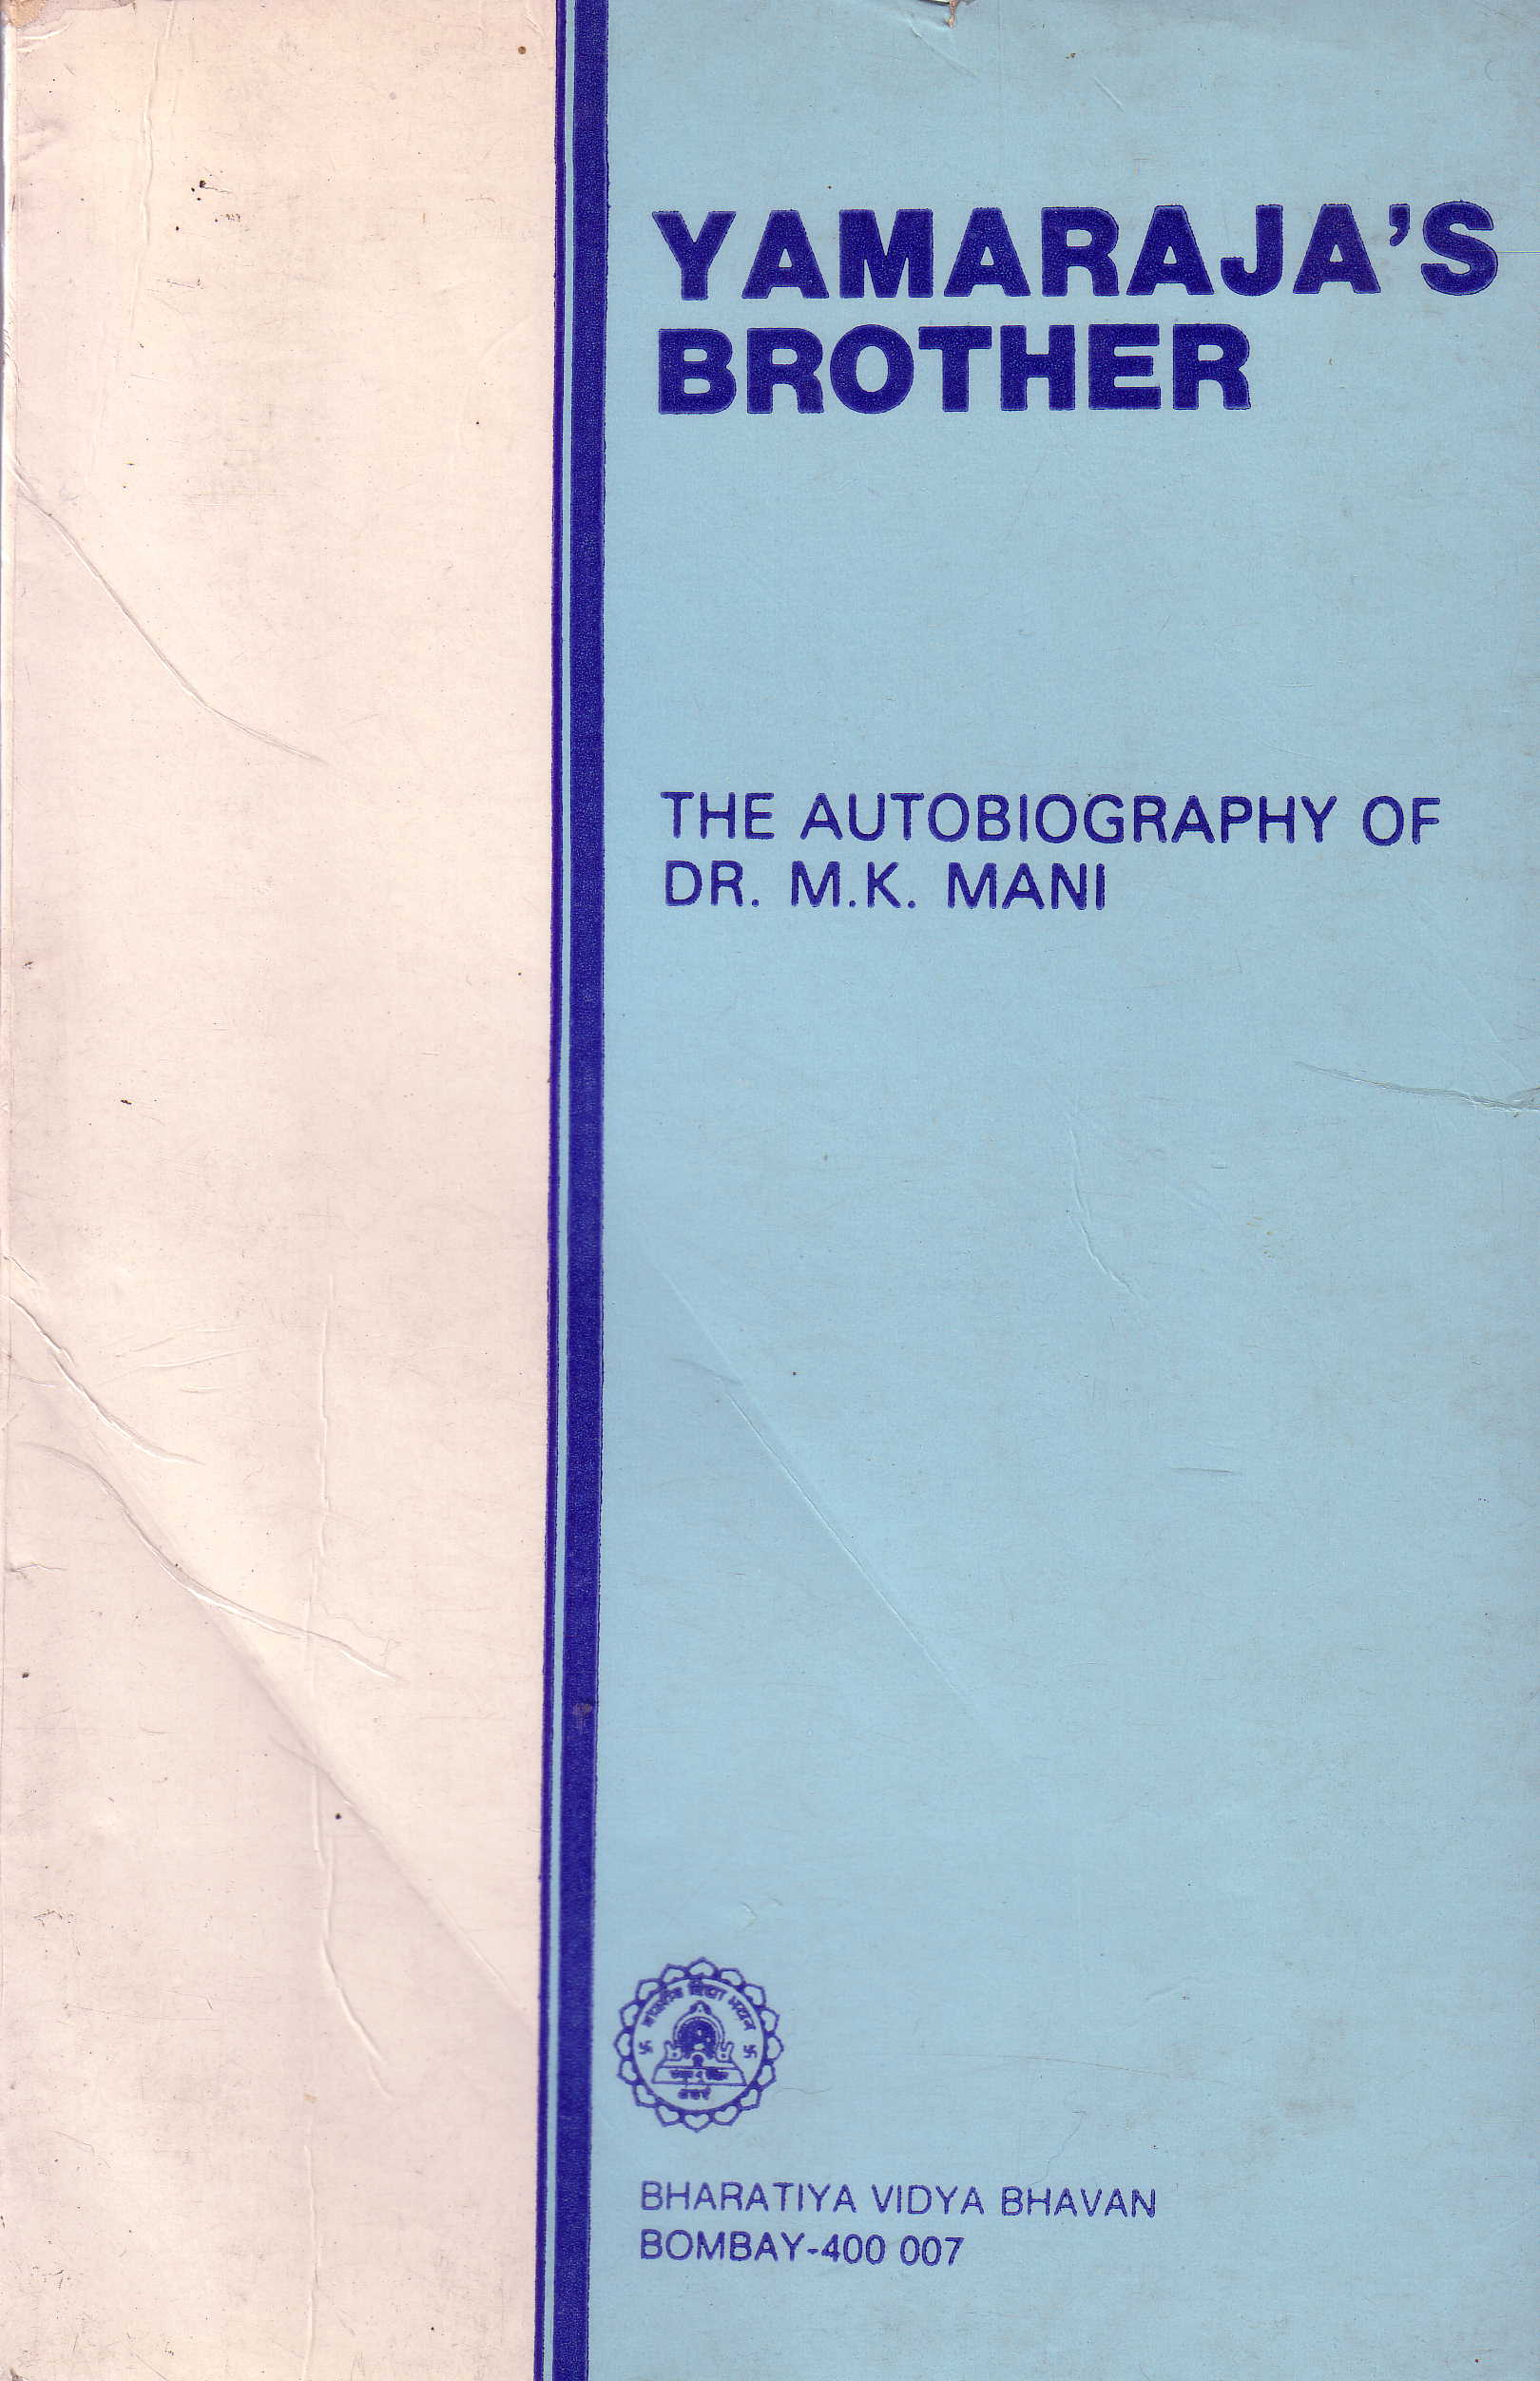 Yamaraja's Brother 1989 book cover